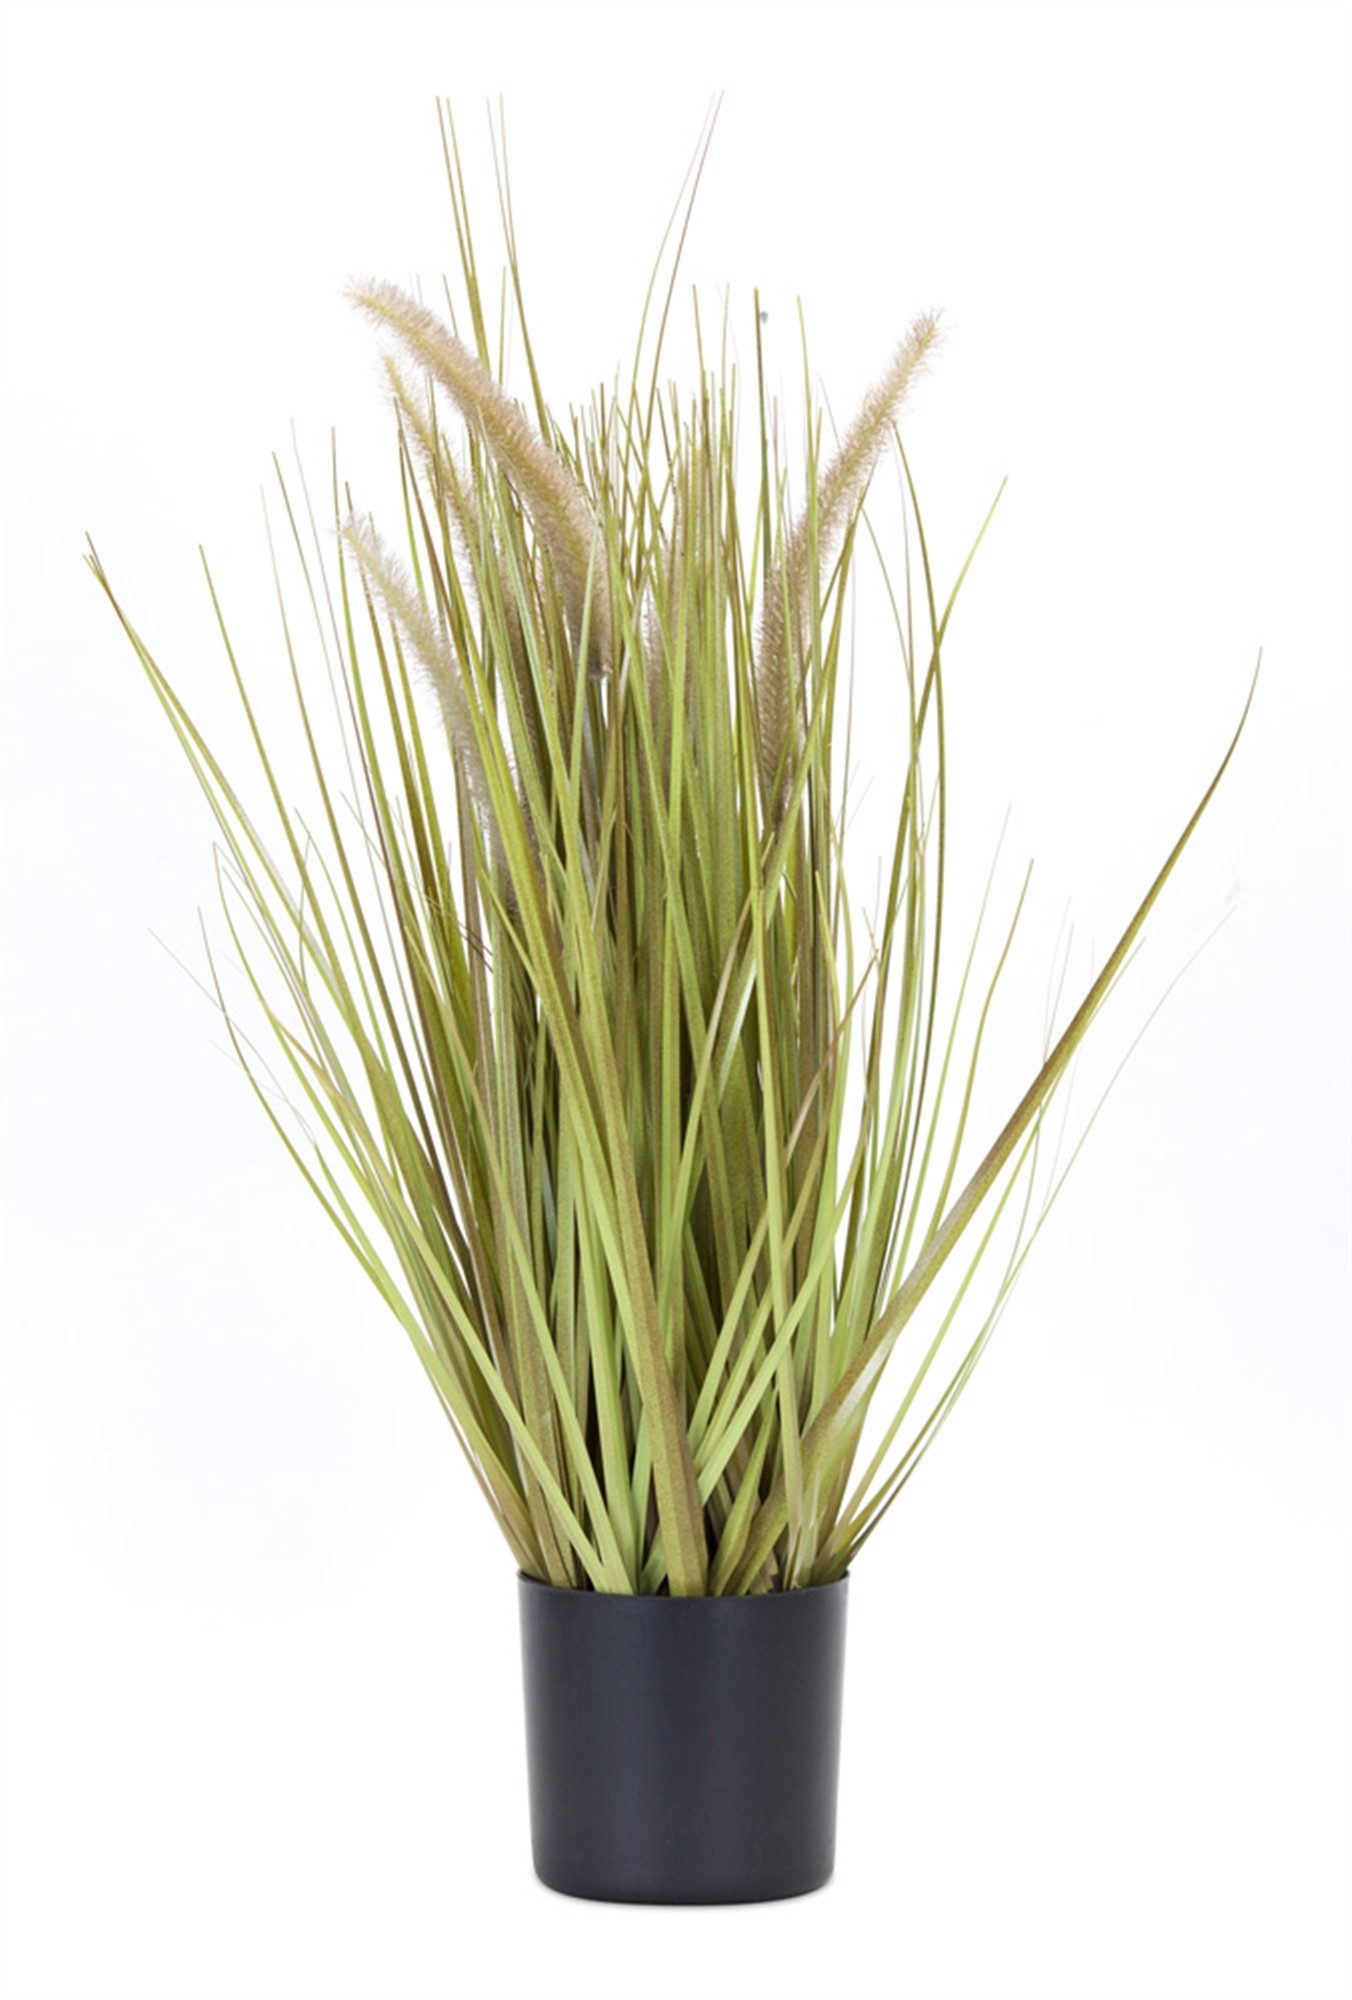 Potted Grass/Dogtail (Set of 2) 27"H PVC/Plastic